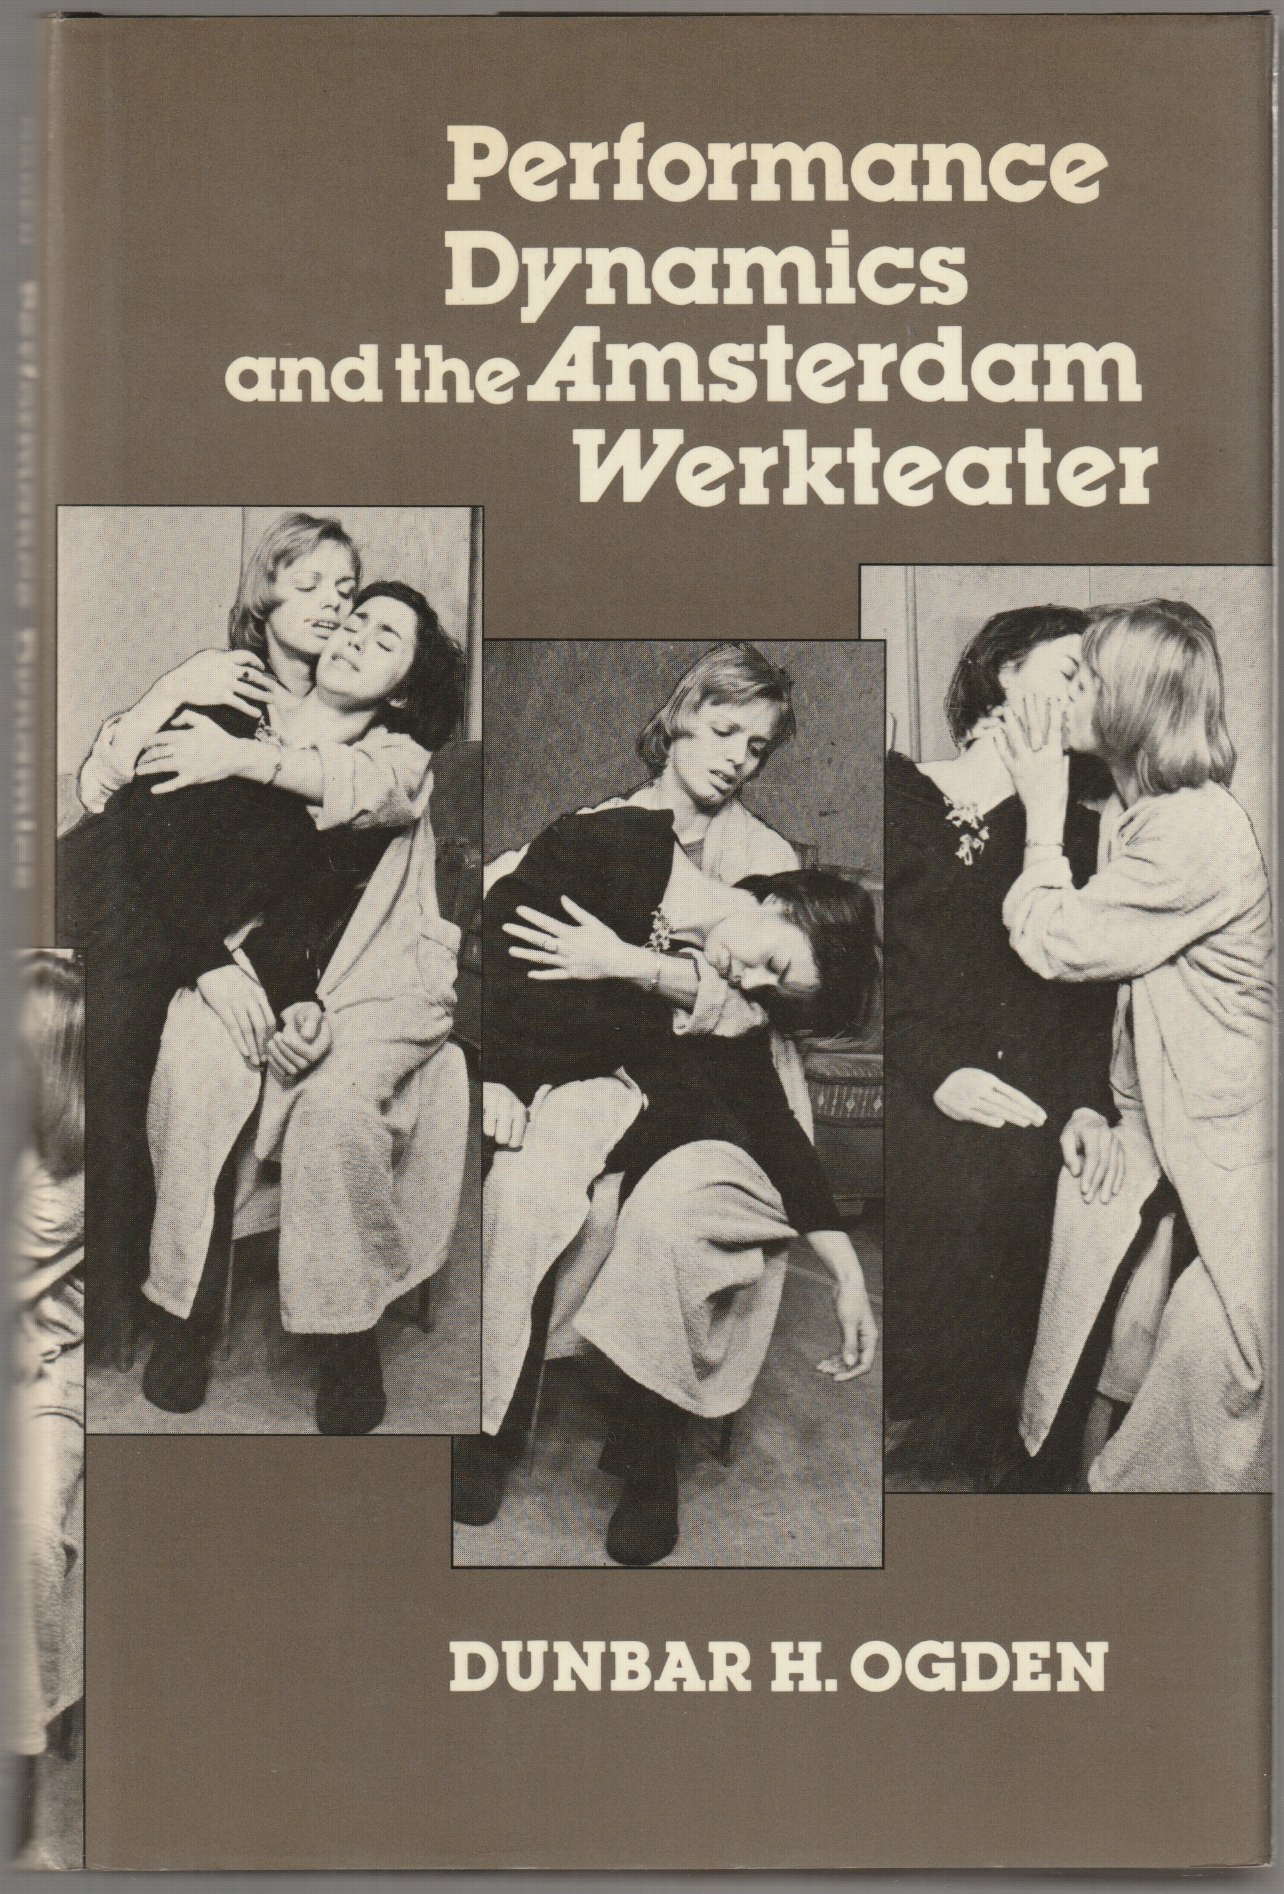 Performance dynamics and the Amsterdam Werkteater.